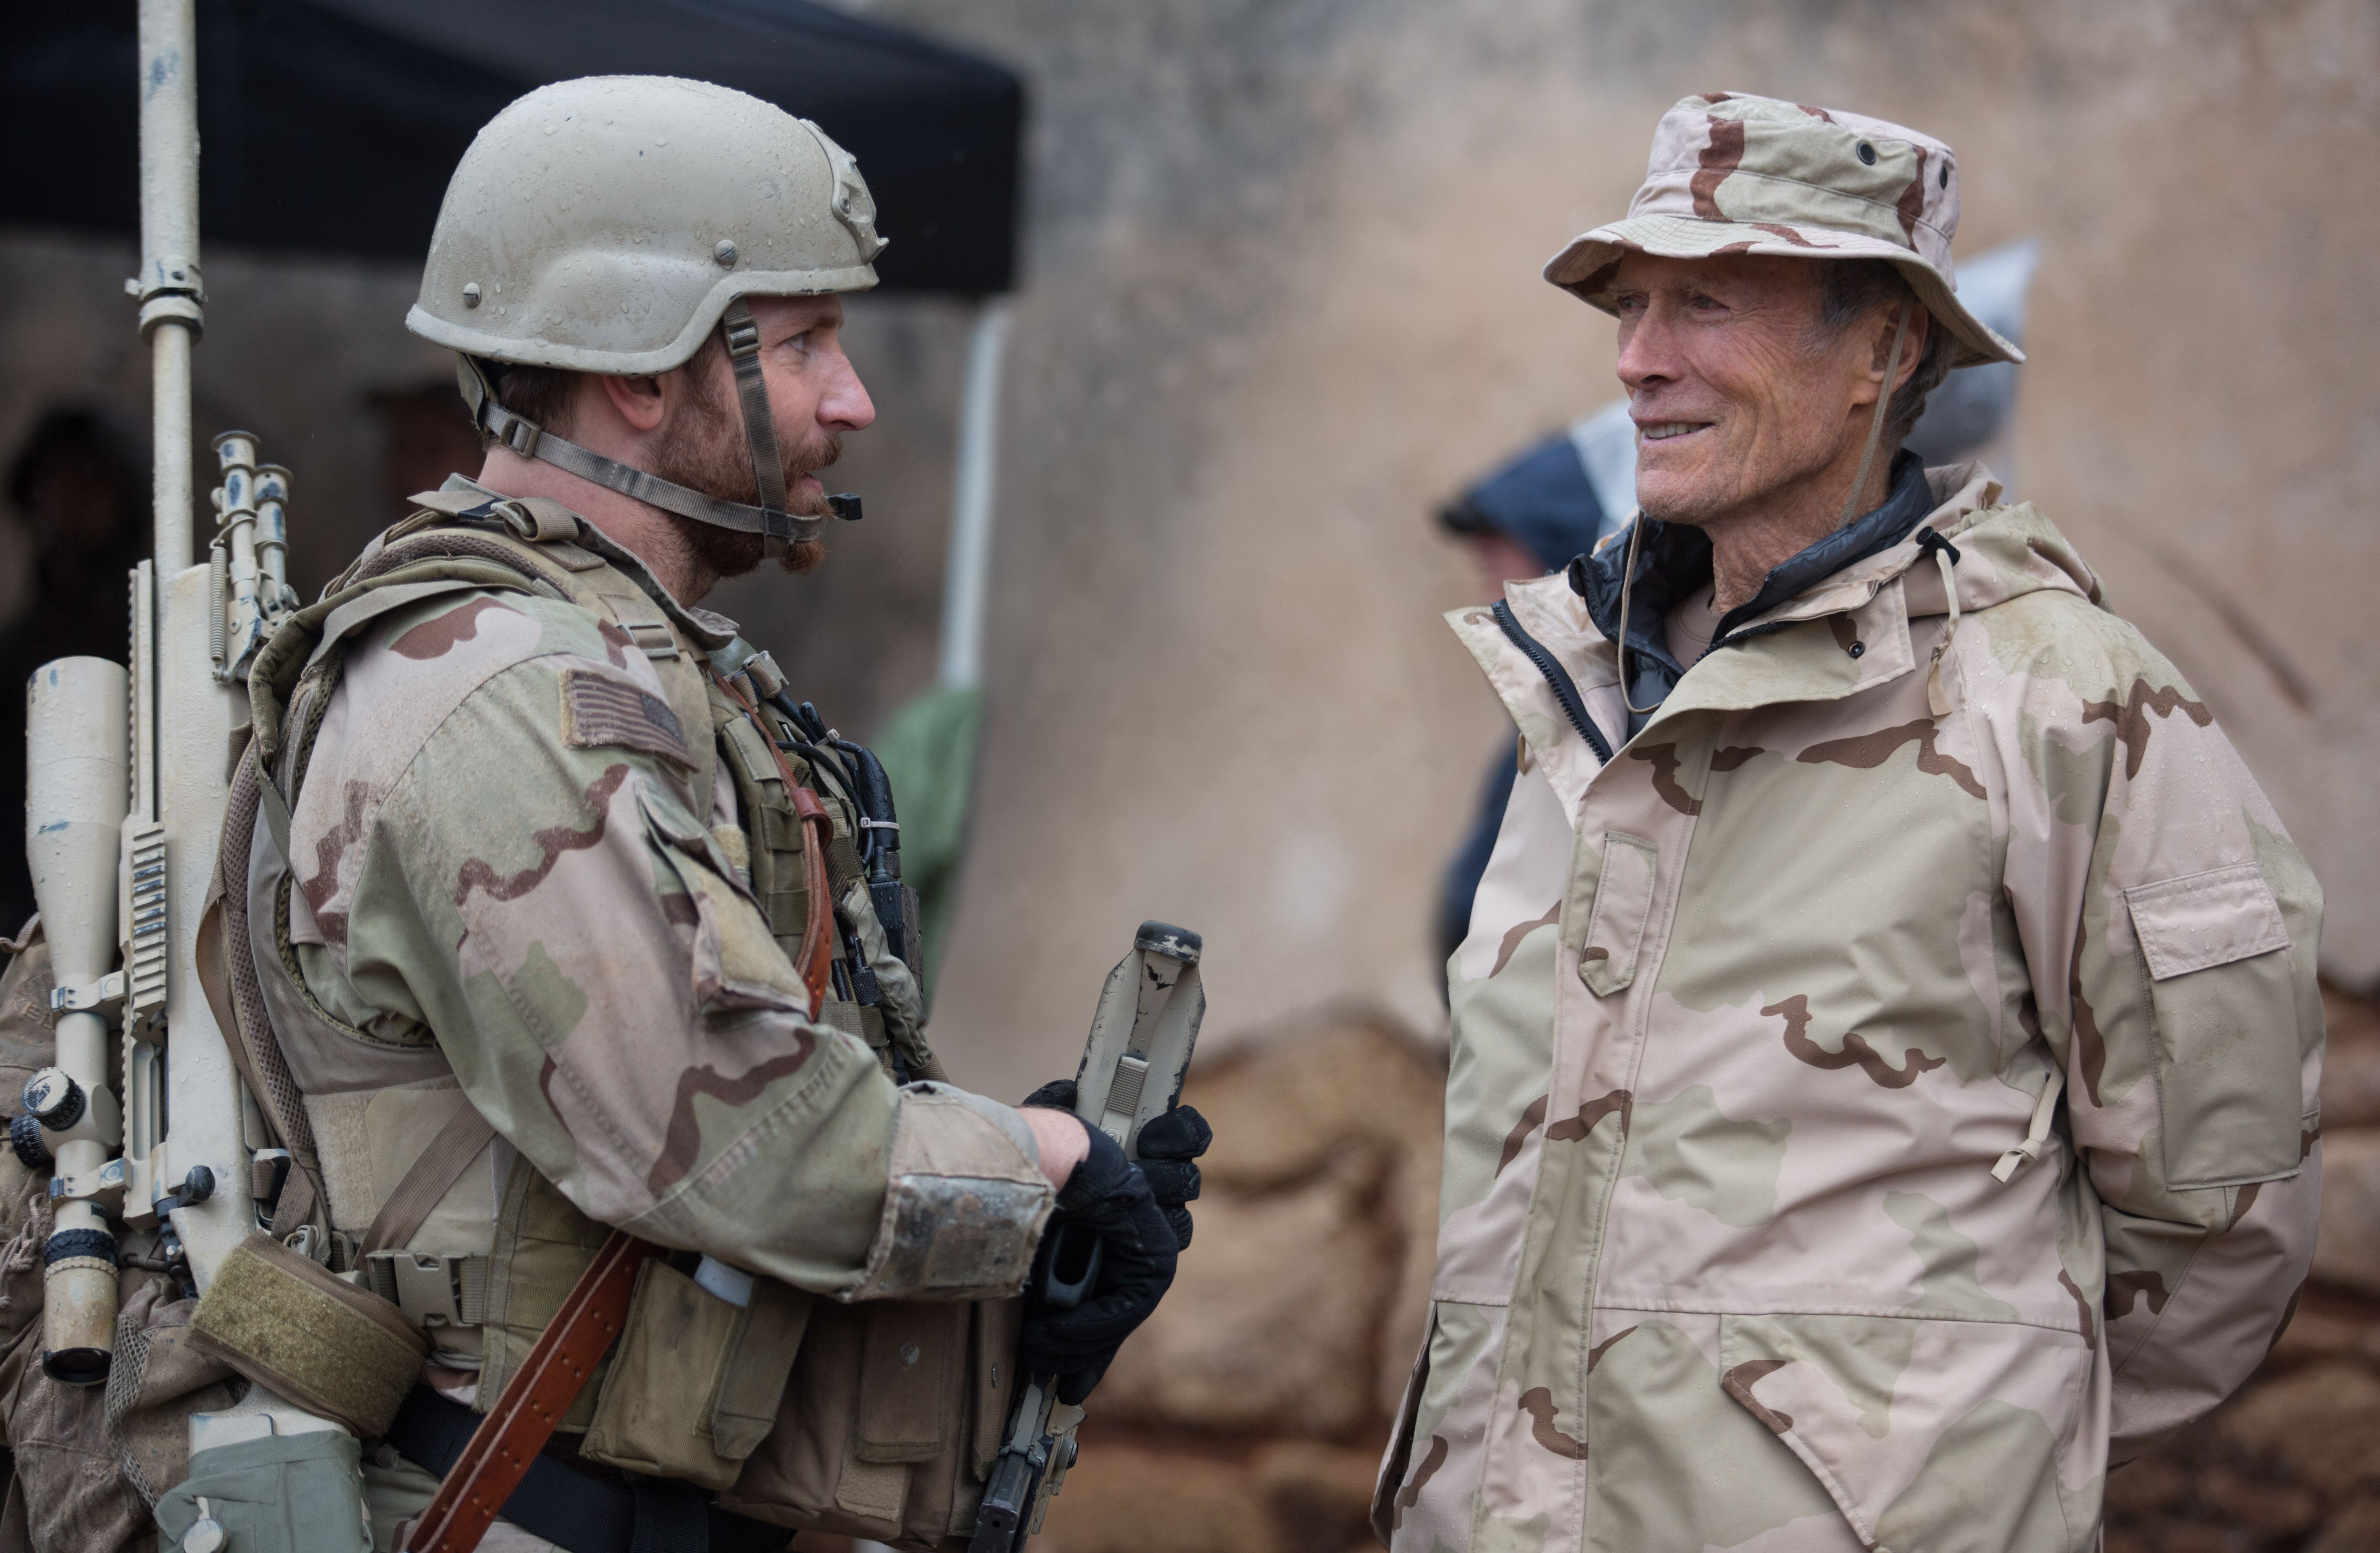 Behind the scenes: Clint Eastwood and Bradley Cooper on the 